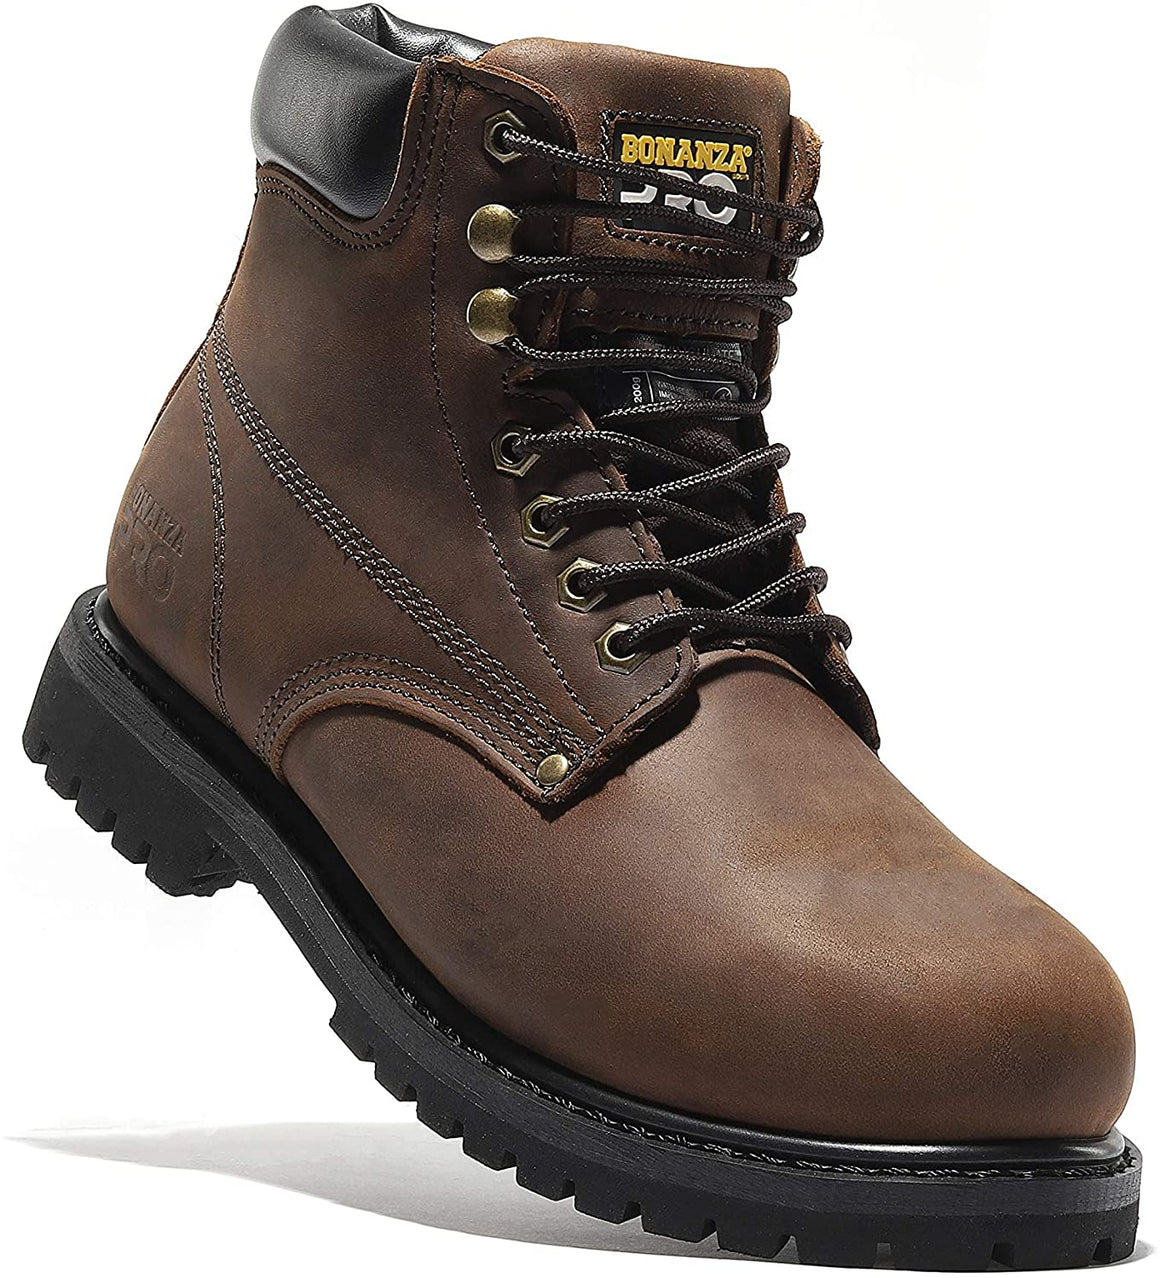 Bonanza Boots Forester 6" Work Boots for Men - Premium Leather, 3M Thinsulate, Puncture Resistant Midsole and Slip-resistant Rubber Outsole | BA-620